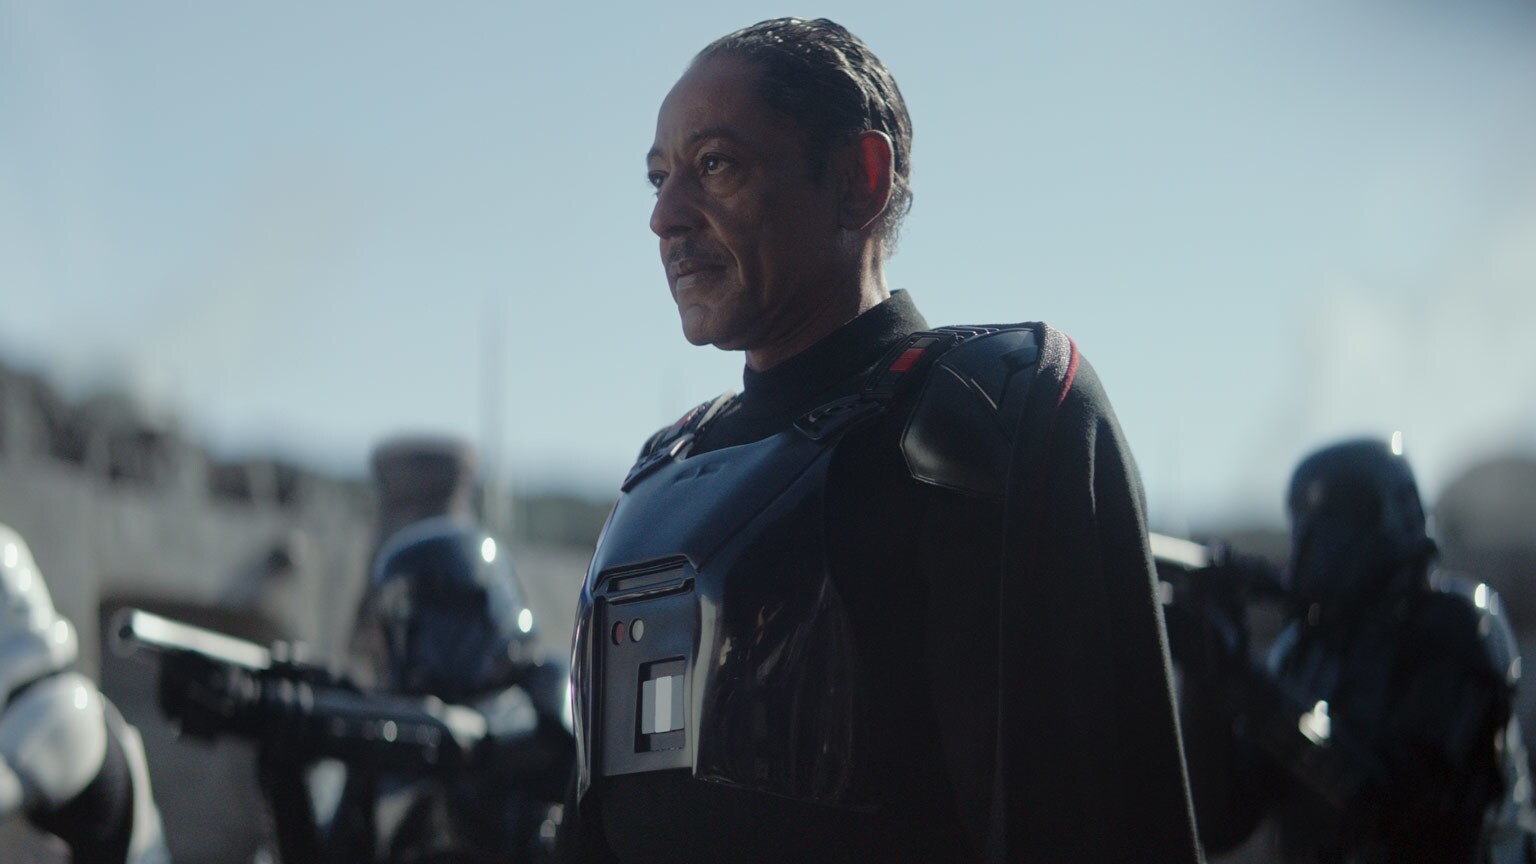 Bounty Hunting Highlights: 7 of Our Favorite Moments from The Mandalorian - "Chapter 7: The Reckoning"